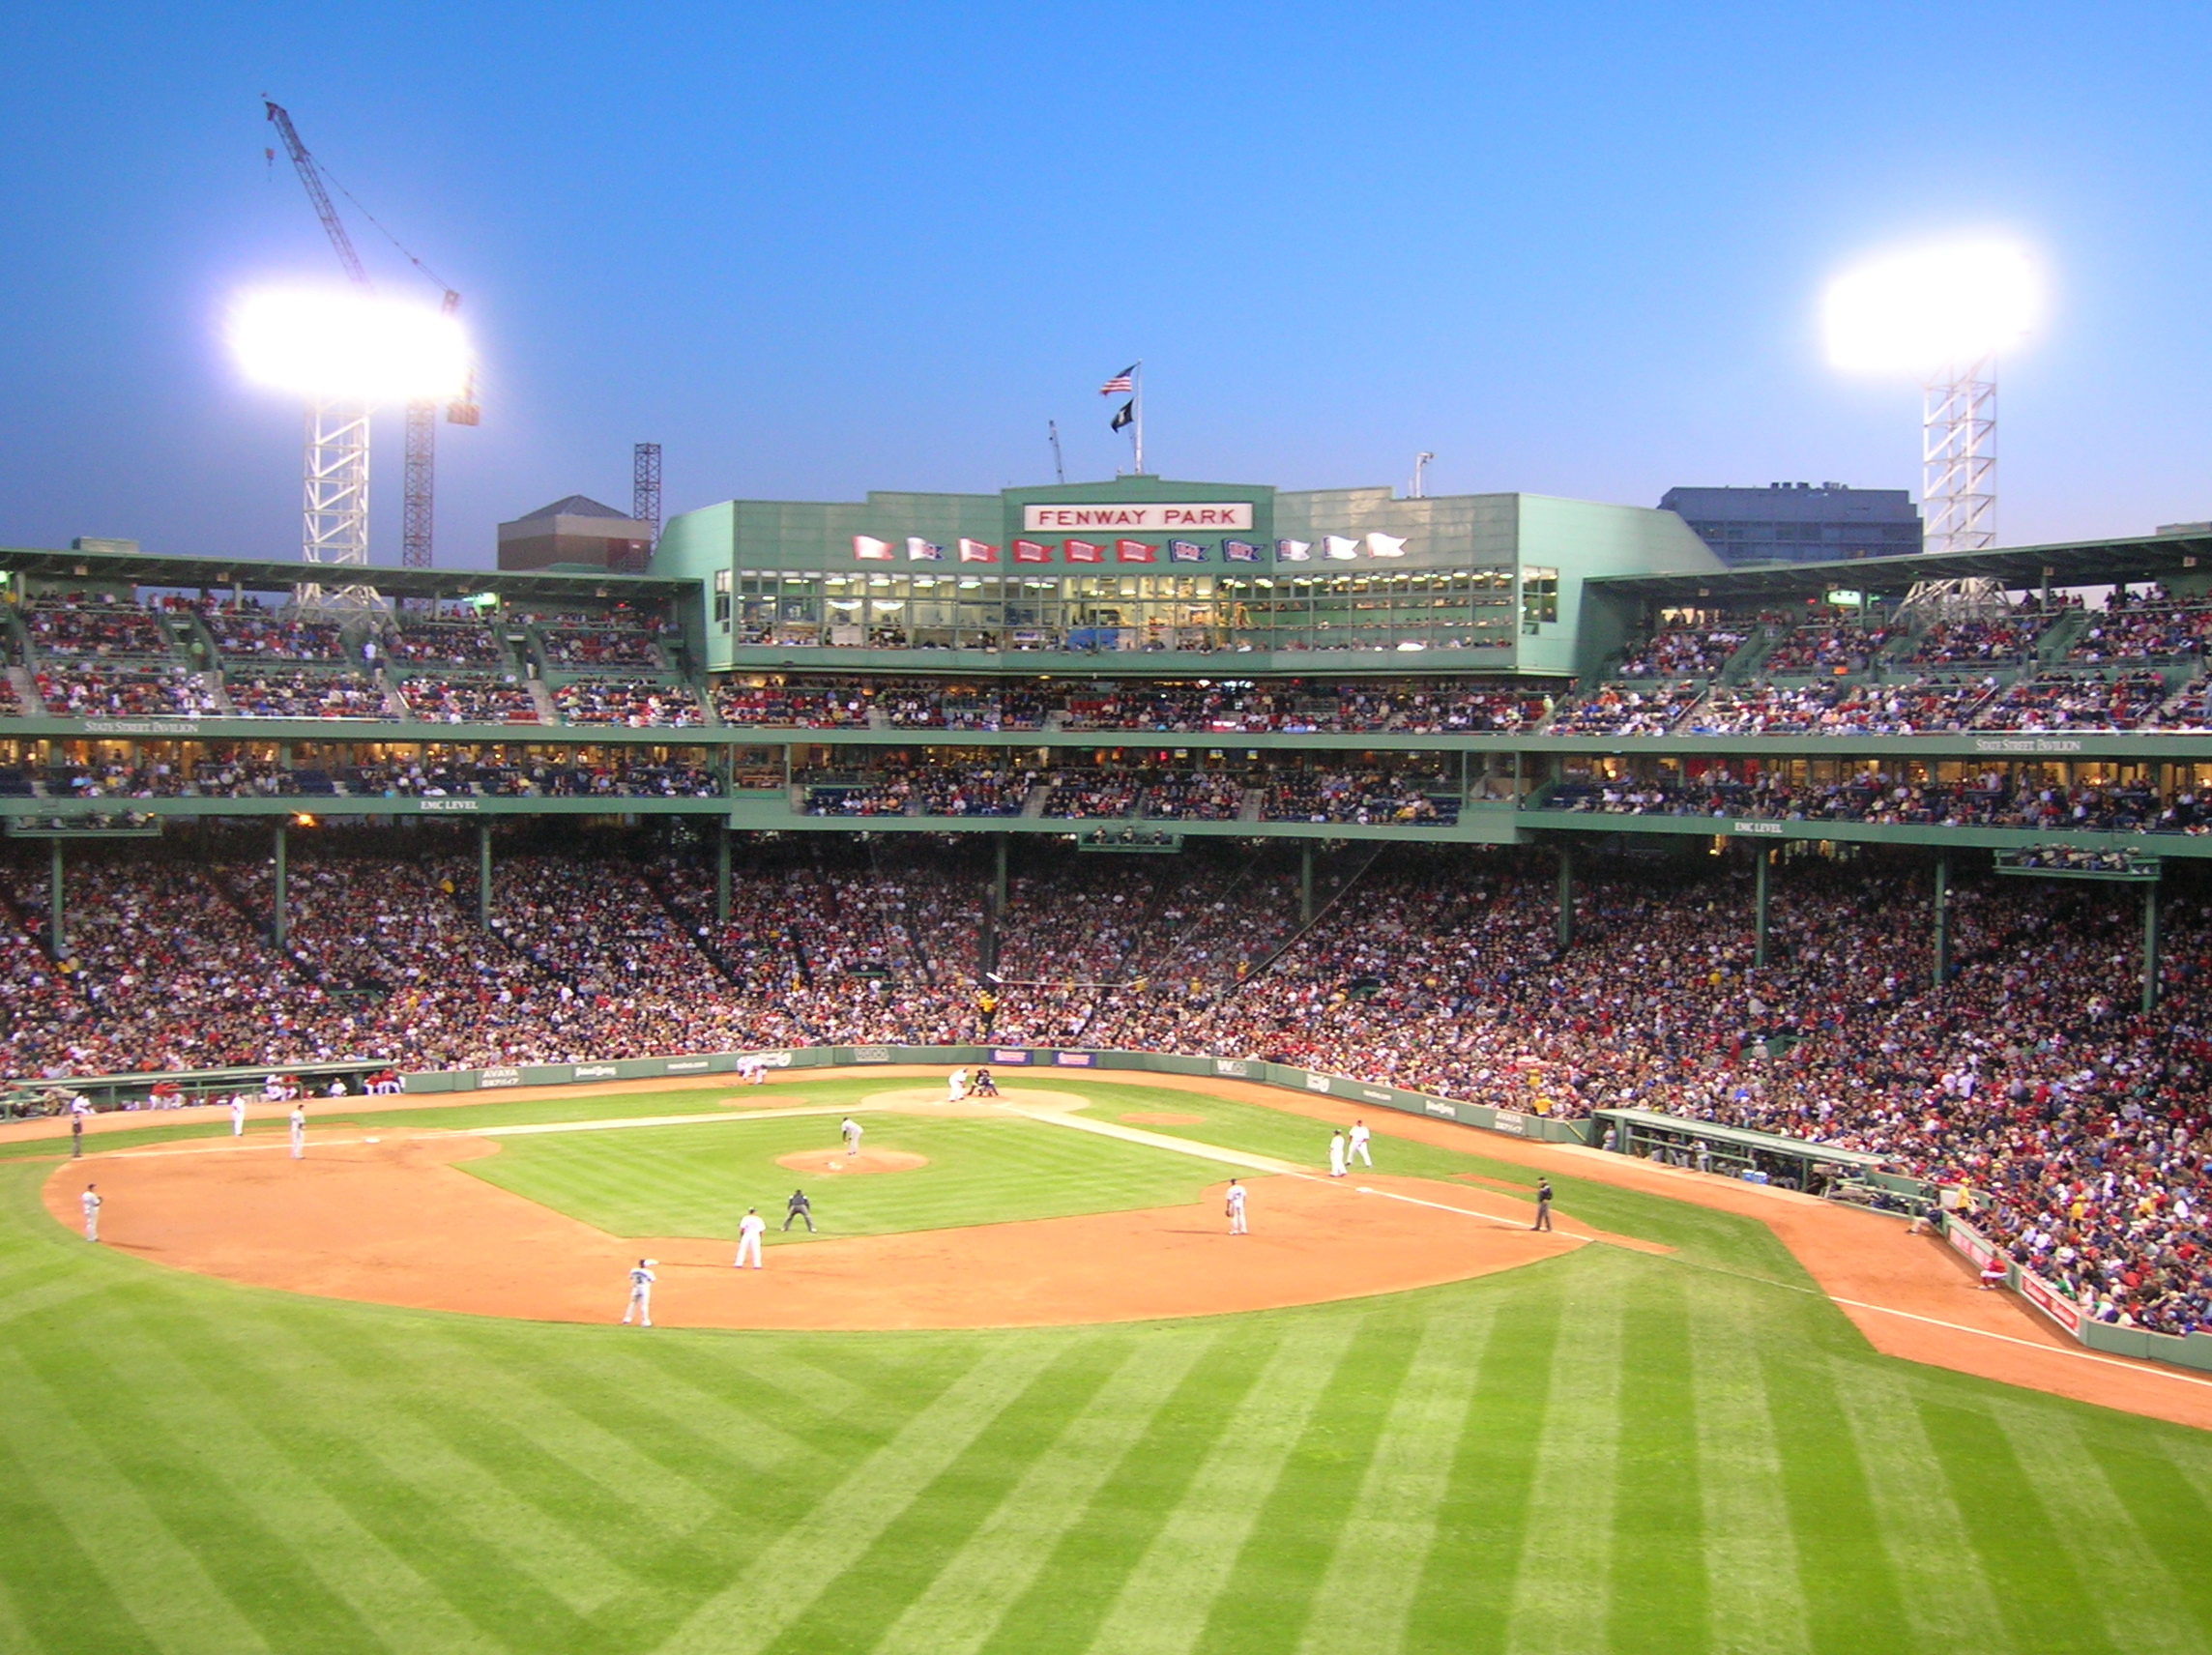 SPY: Fenway Park and JetBlue Park are now a part of the Applied UV air  purifier revolution